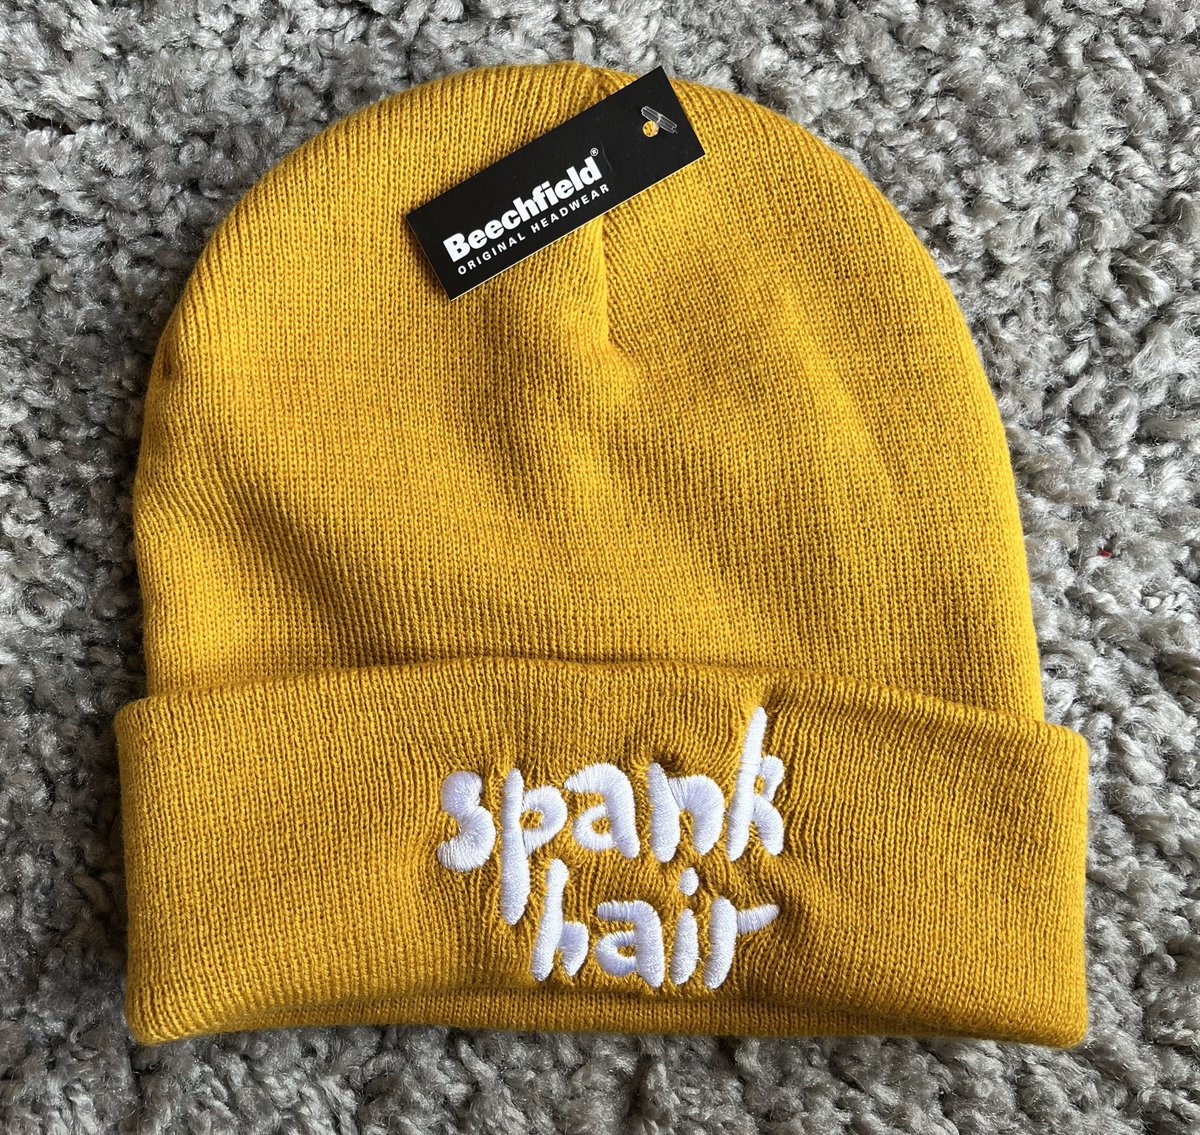 hello twitter legends - its BANDCAMP FRIDAY and I've finally put our winter merch online, just in time for summer! head to spankhair.bandcamp.com/merch if you'd like to support our little band and grab a stylish hat and/or sweatshirt at the same time xxxxxx